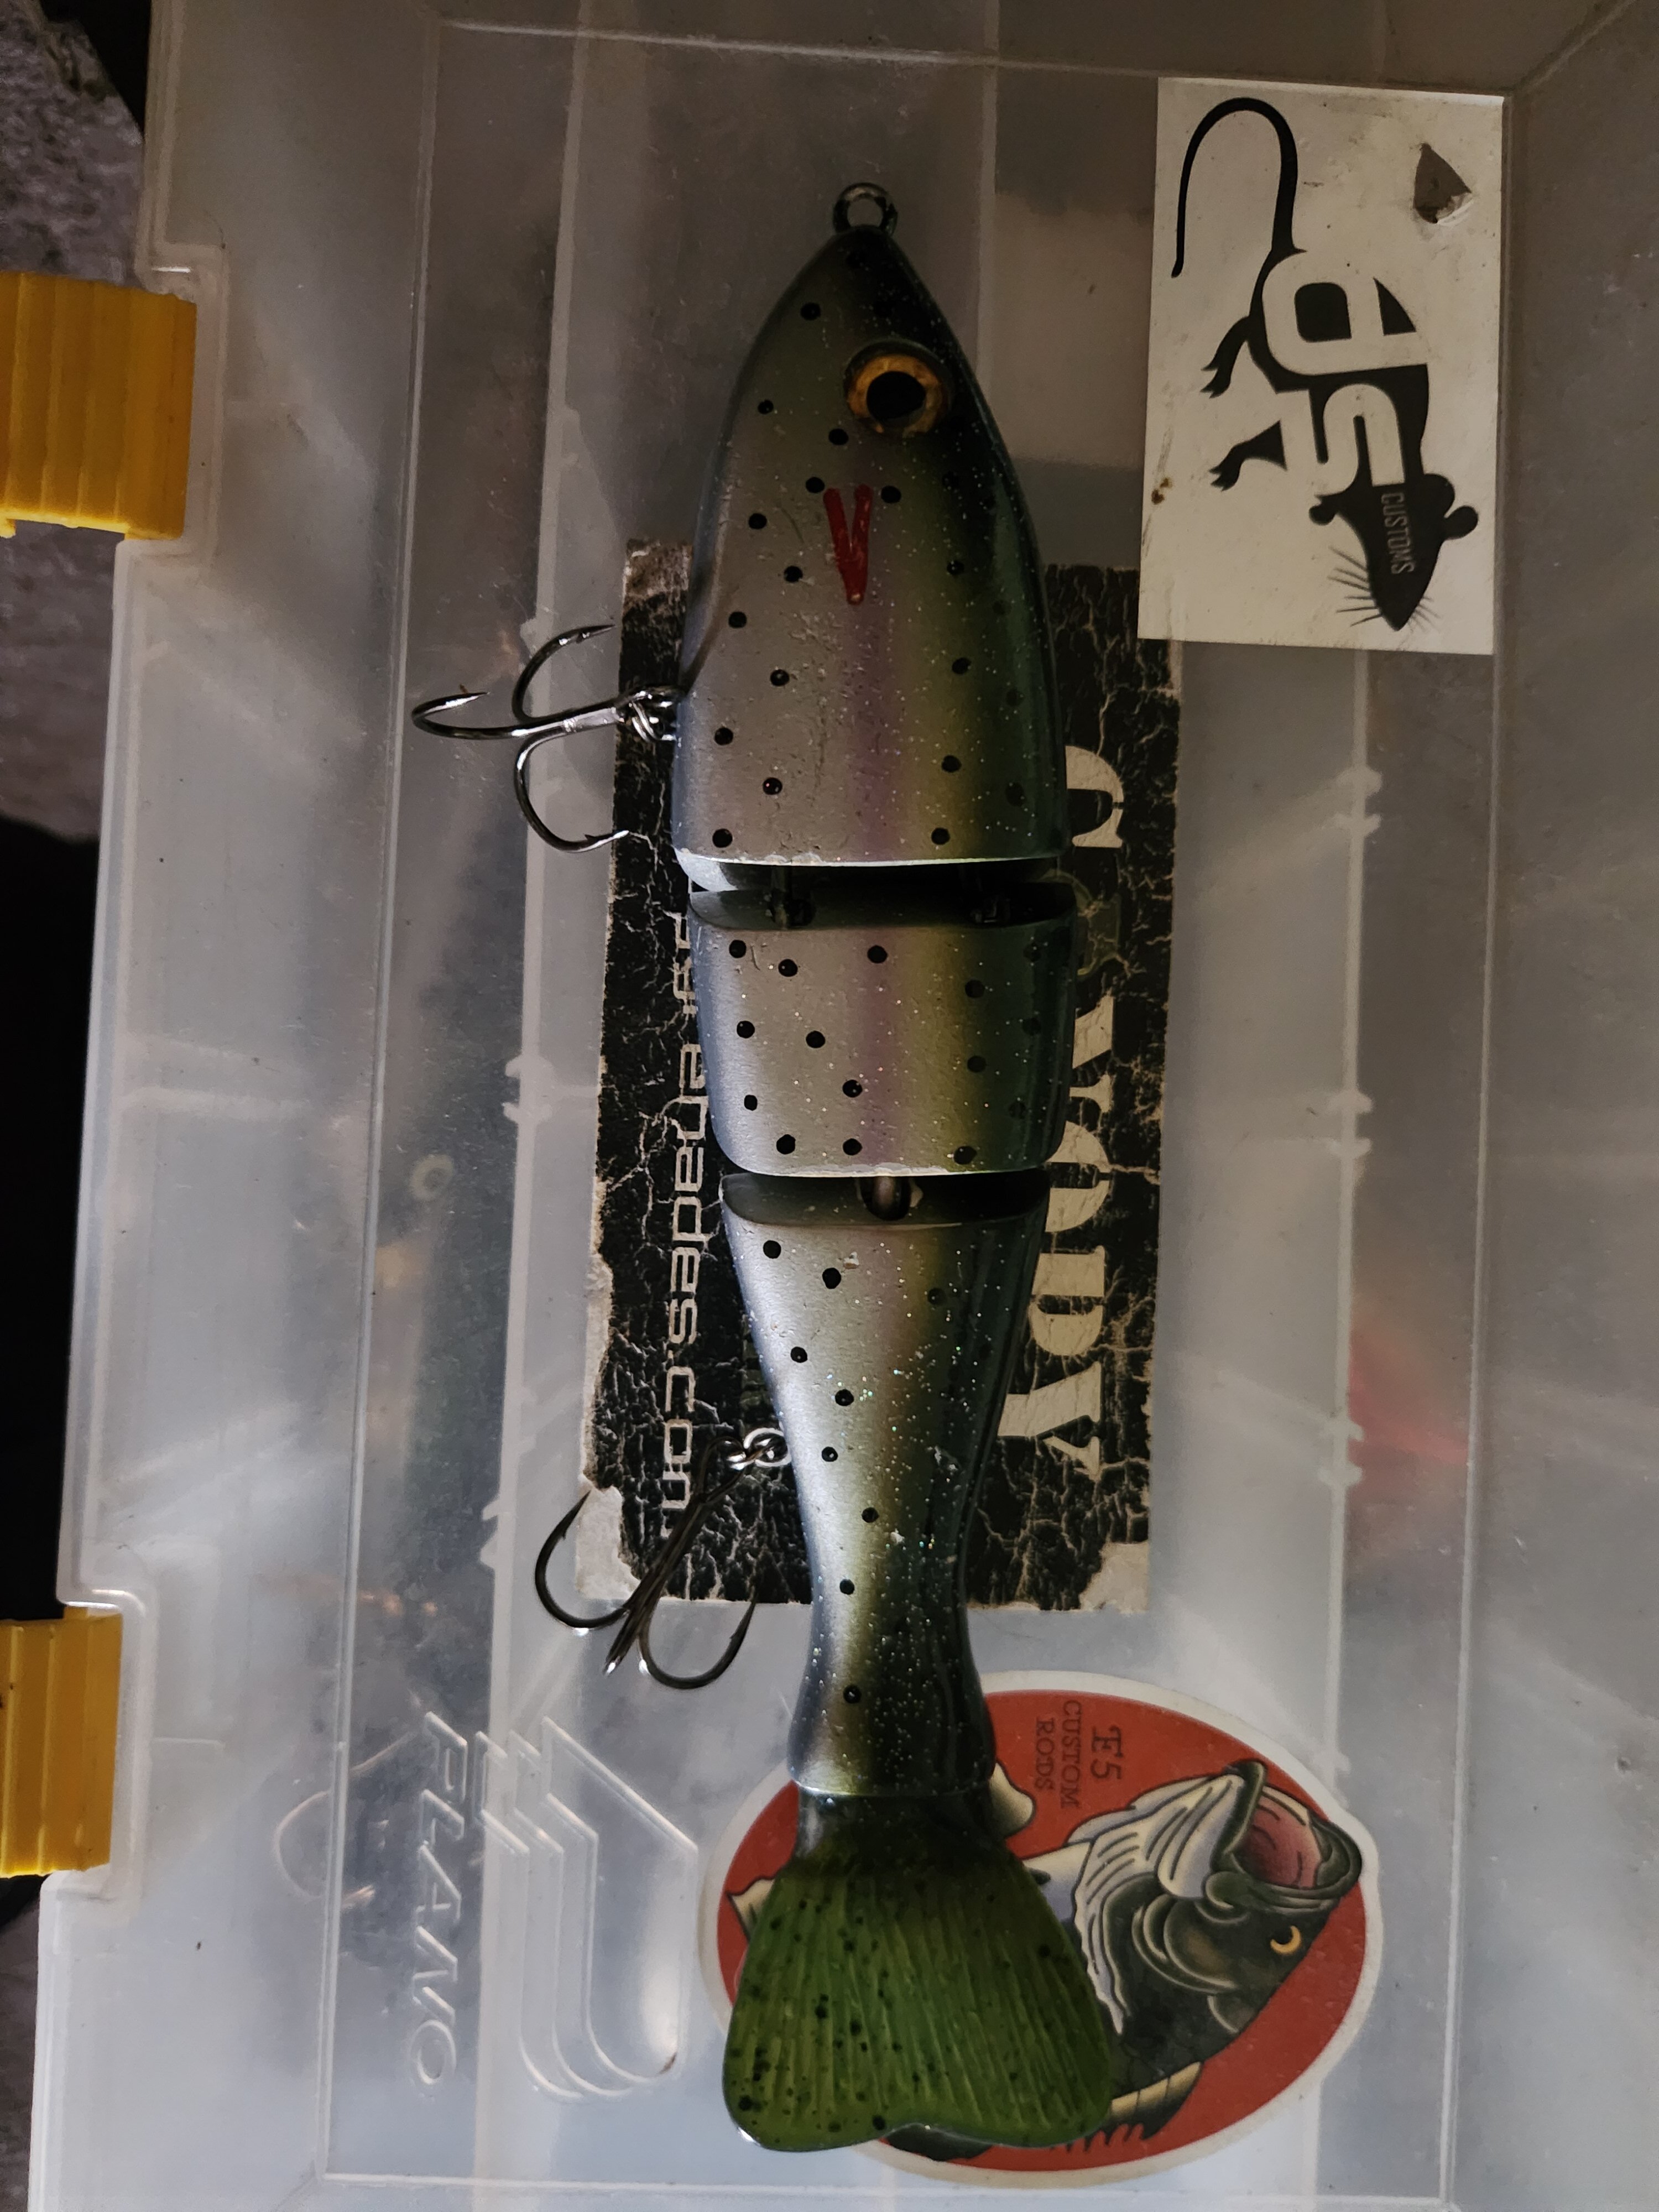 Triple trout for trade or sale - Black Market - Swimbait Underground